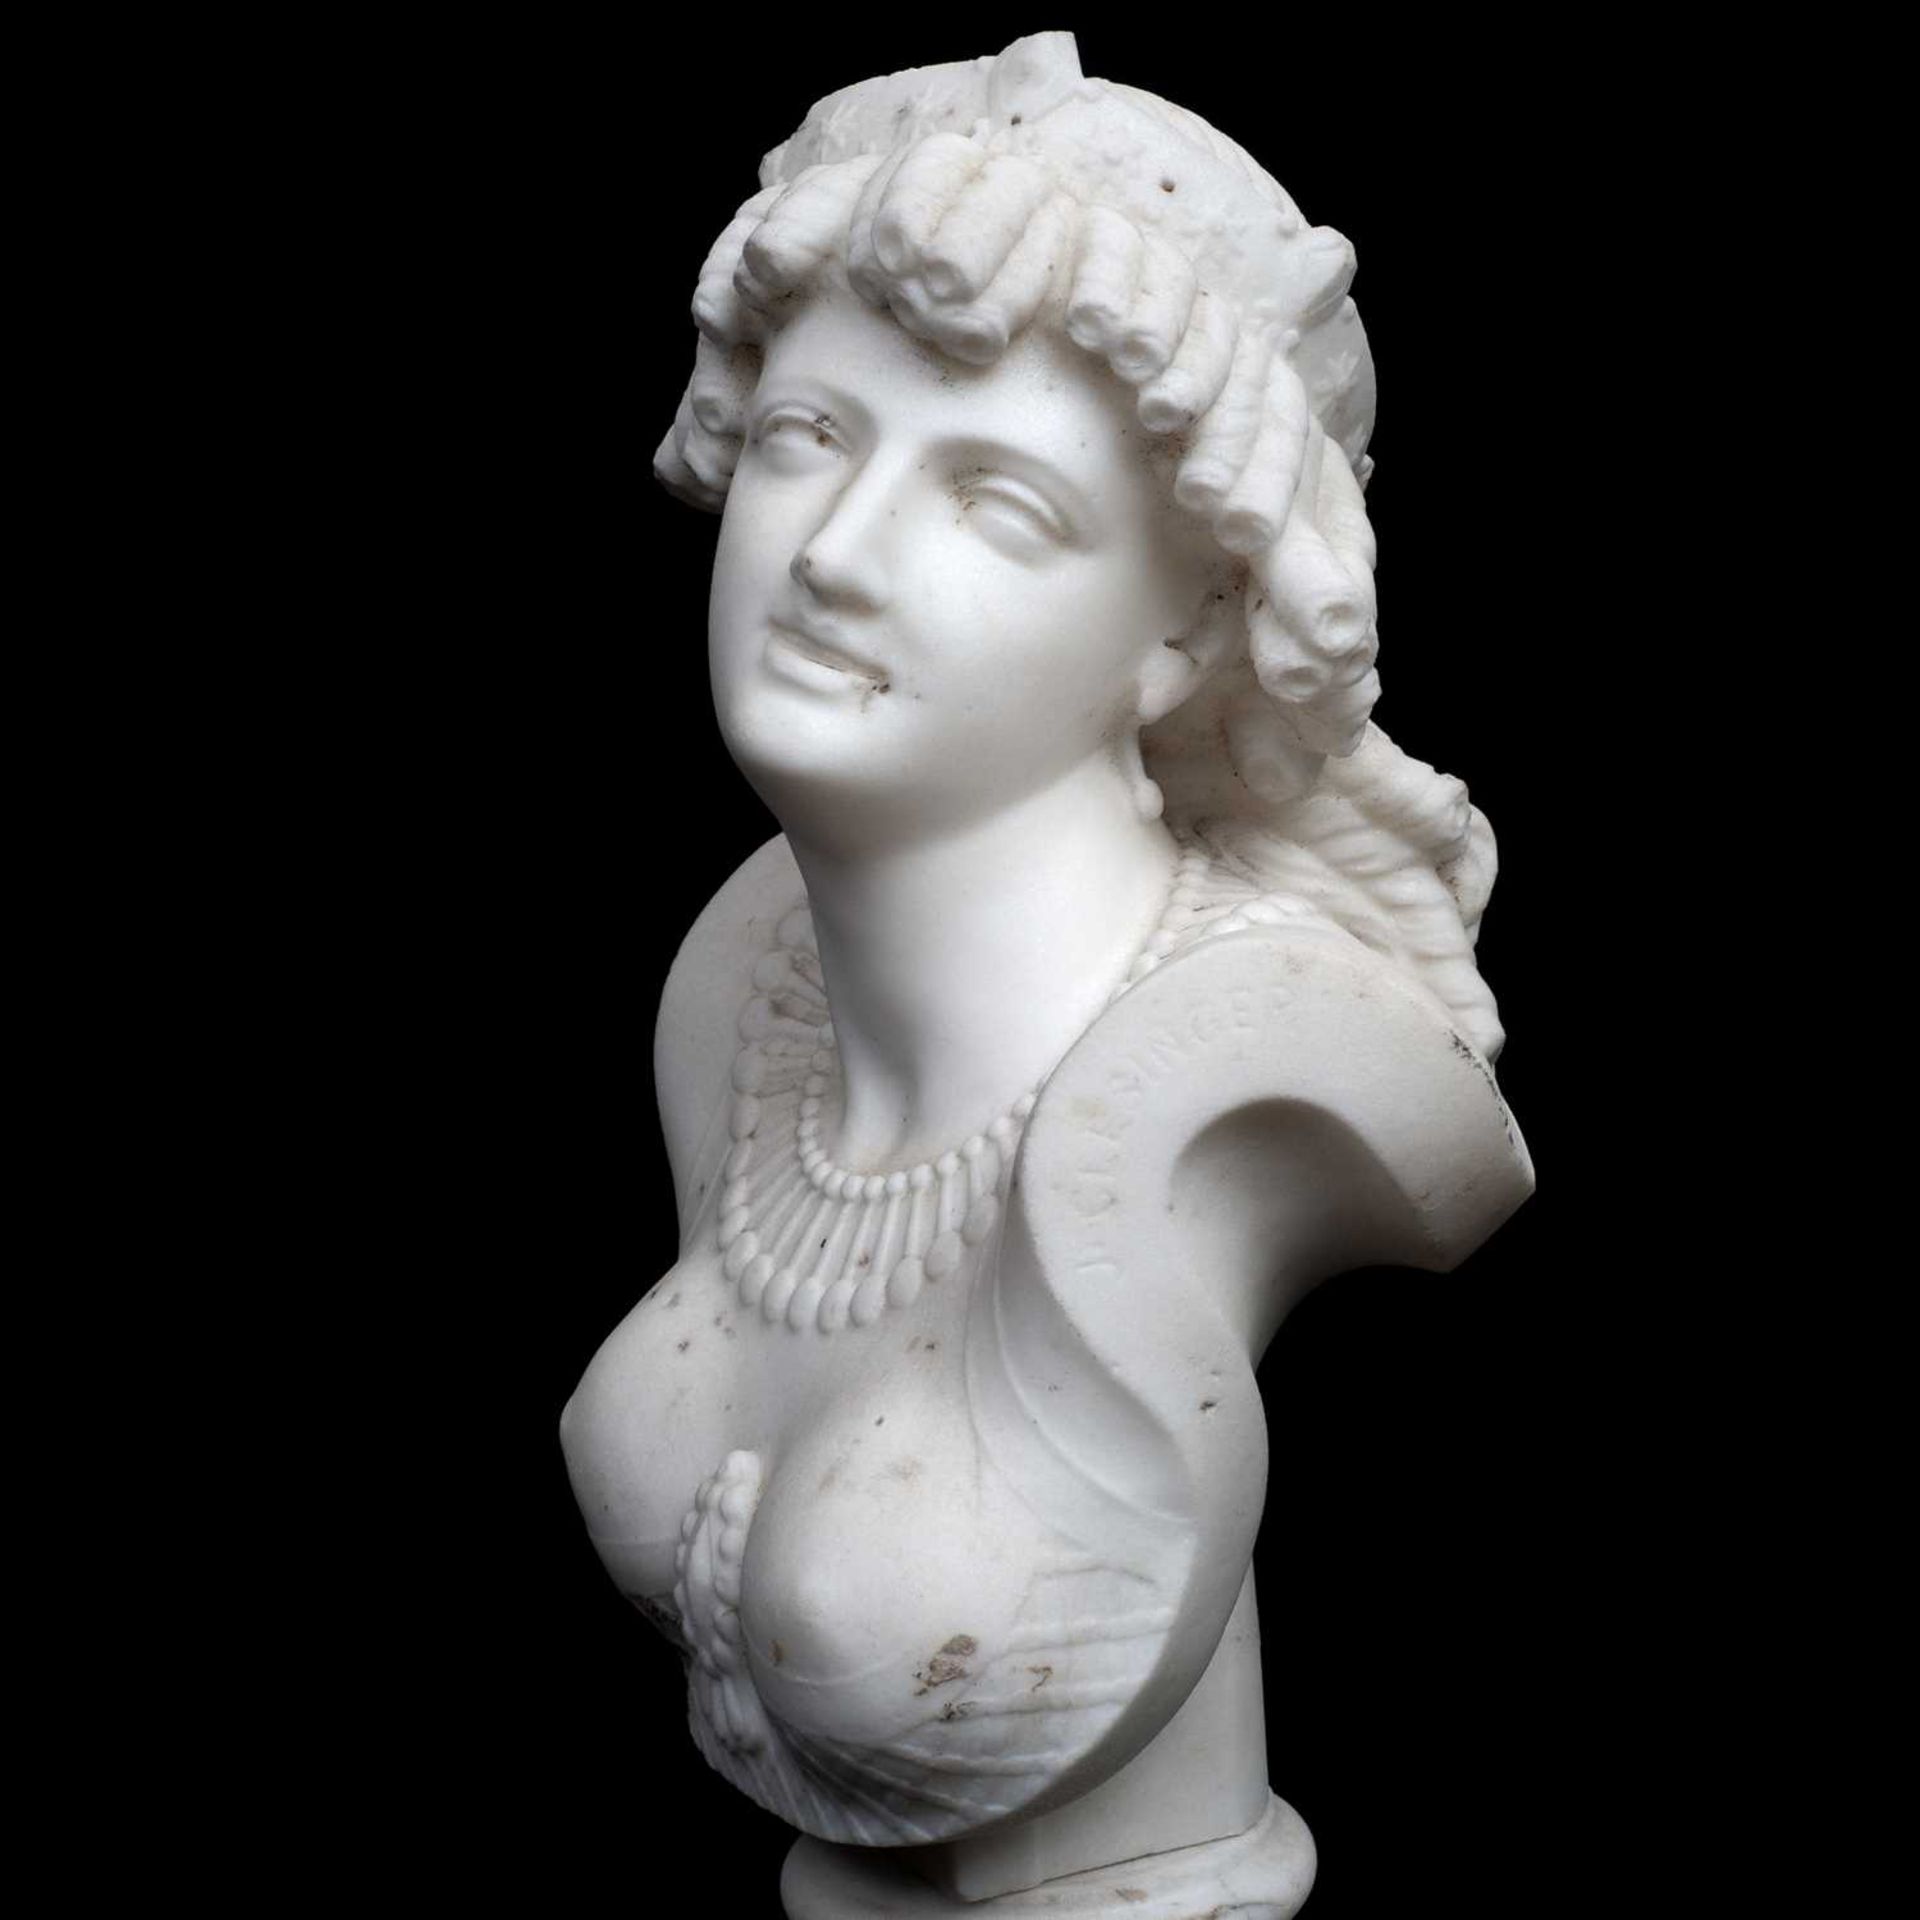 JEAN-BAPTISTE CLESINGER (FRENCH, 1814-1883): A SMALL MARBLE BUST OF CLEOPATRA - Image 3 of 5